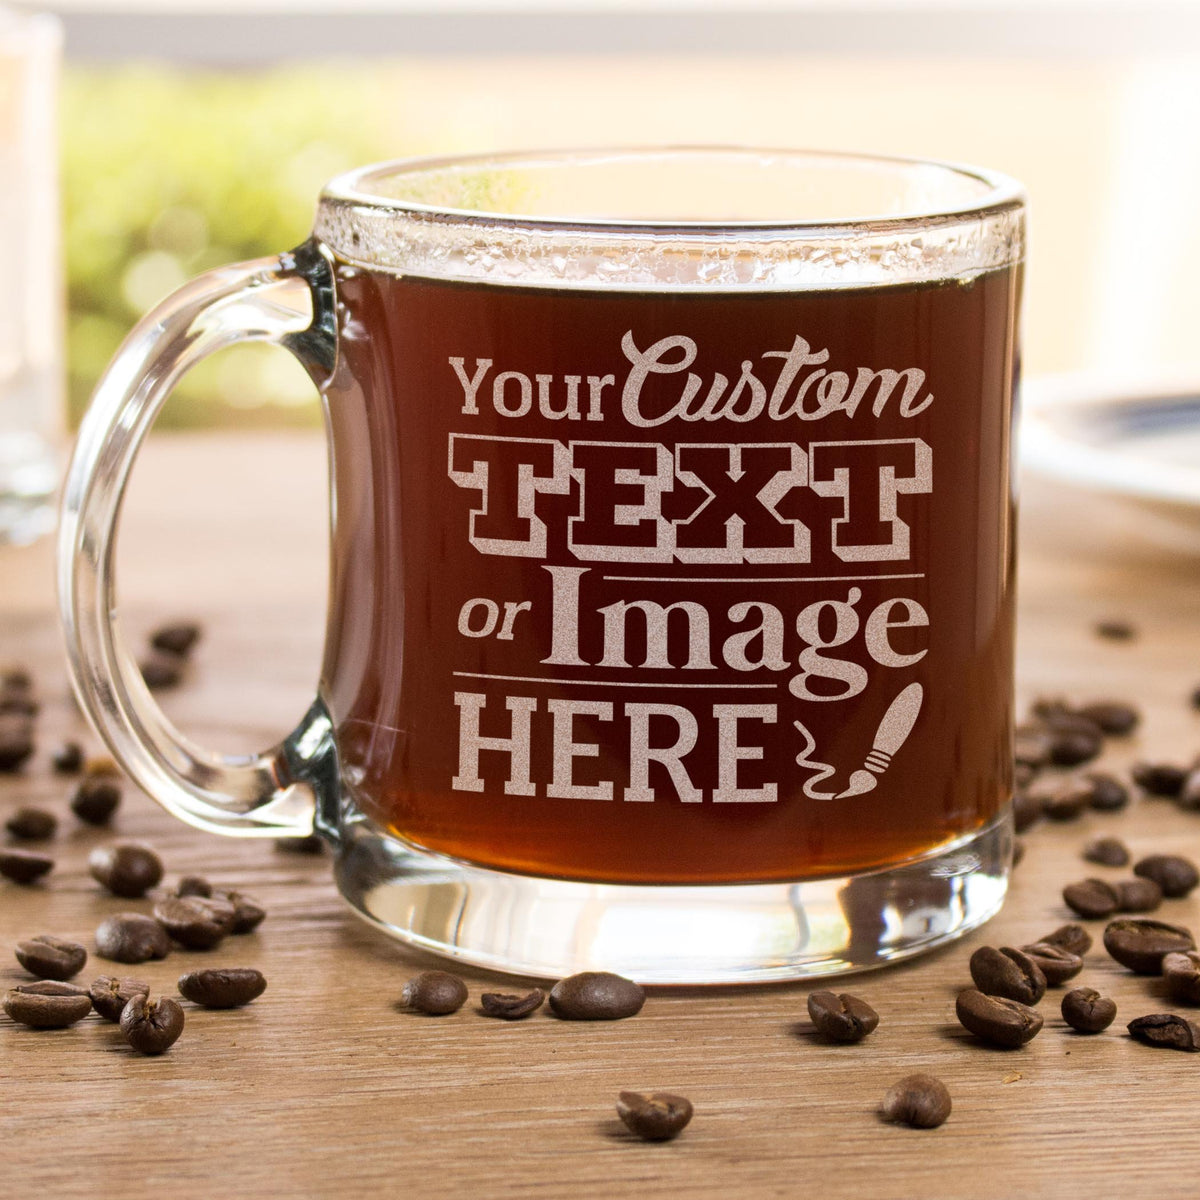 Personalized Crystal Clear Glass Coffee Mugs. Mother's Day Gifts